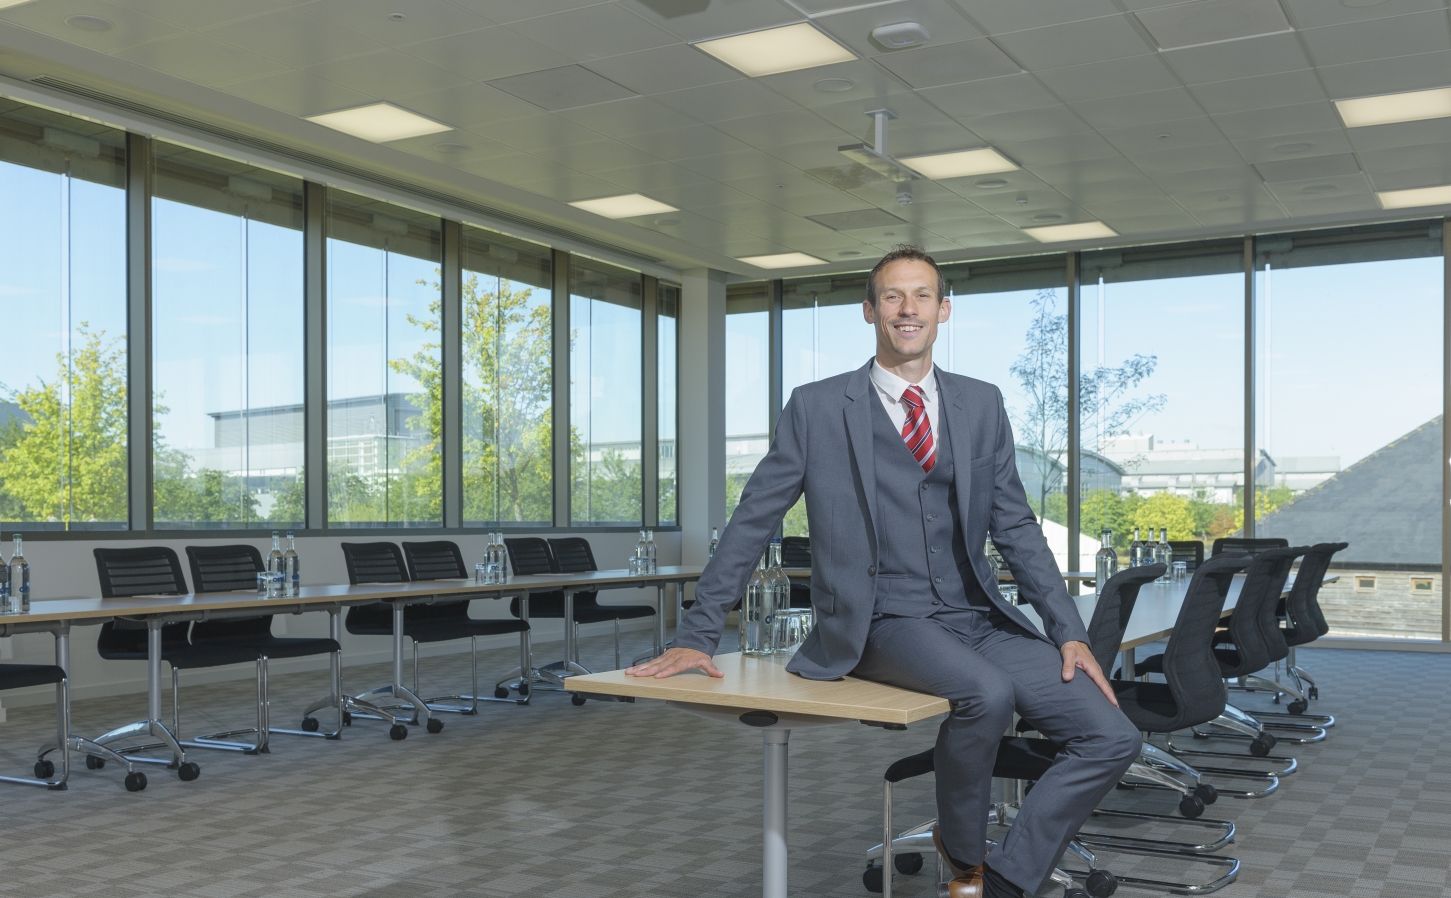 Andrew Bell, new manager of the Granta Centre, in one of its modern conference rooms